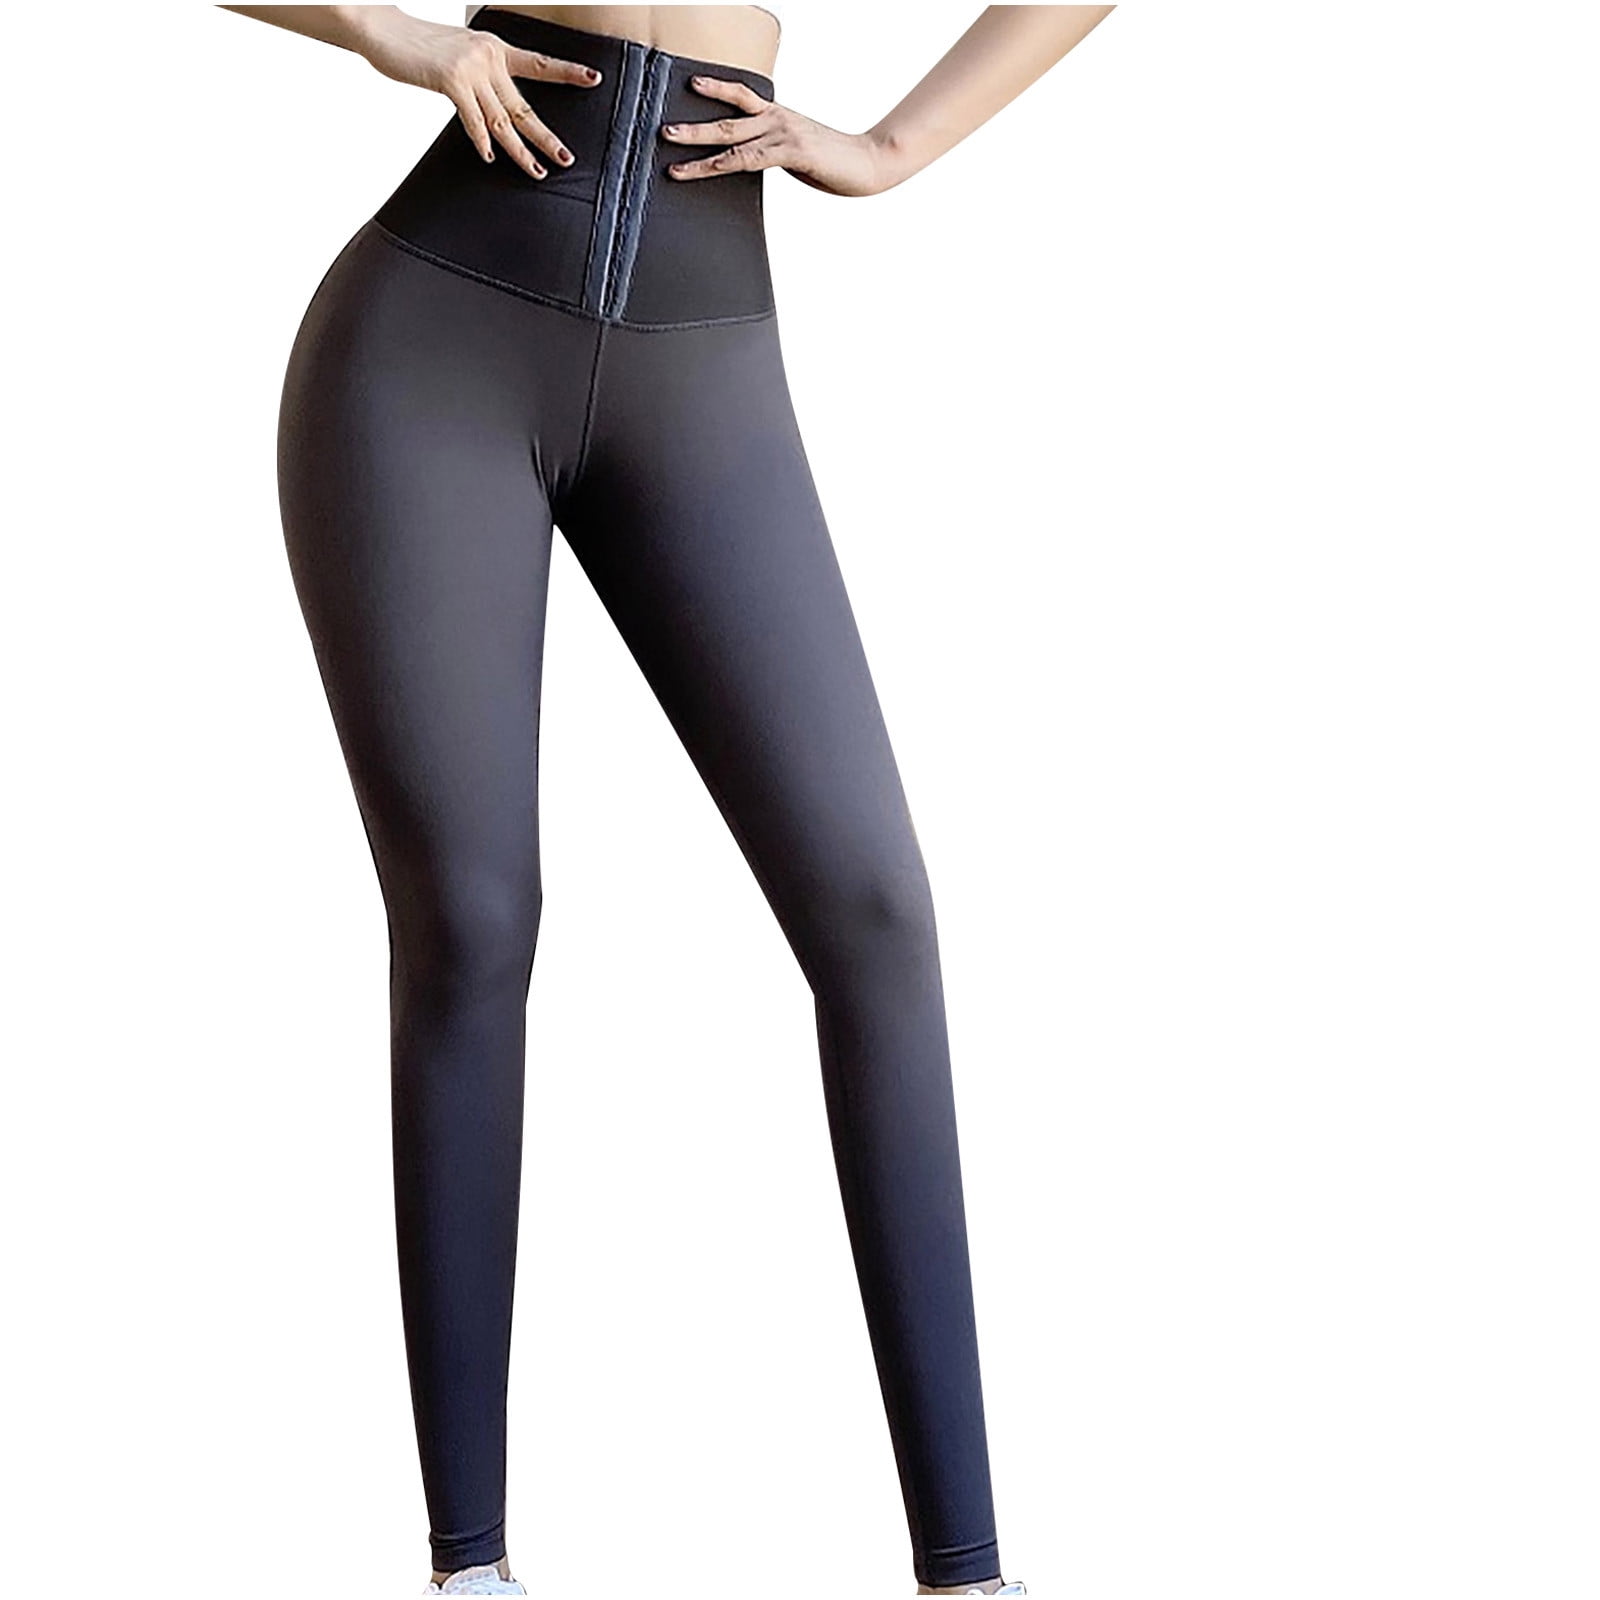 Lucy Sports Leggings for Women, 28 High Waist Yoga Pants with Pockets,  Four Way Stretch Tummy Control. (4, Regular, Black) at  Women's  Clothing store